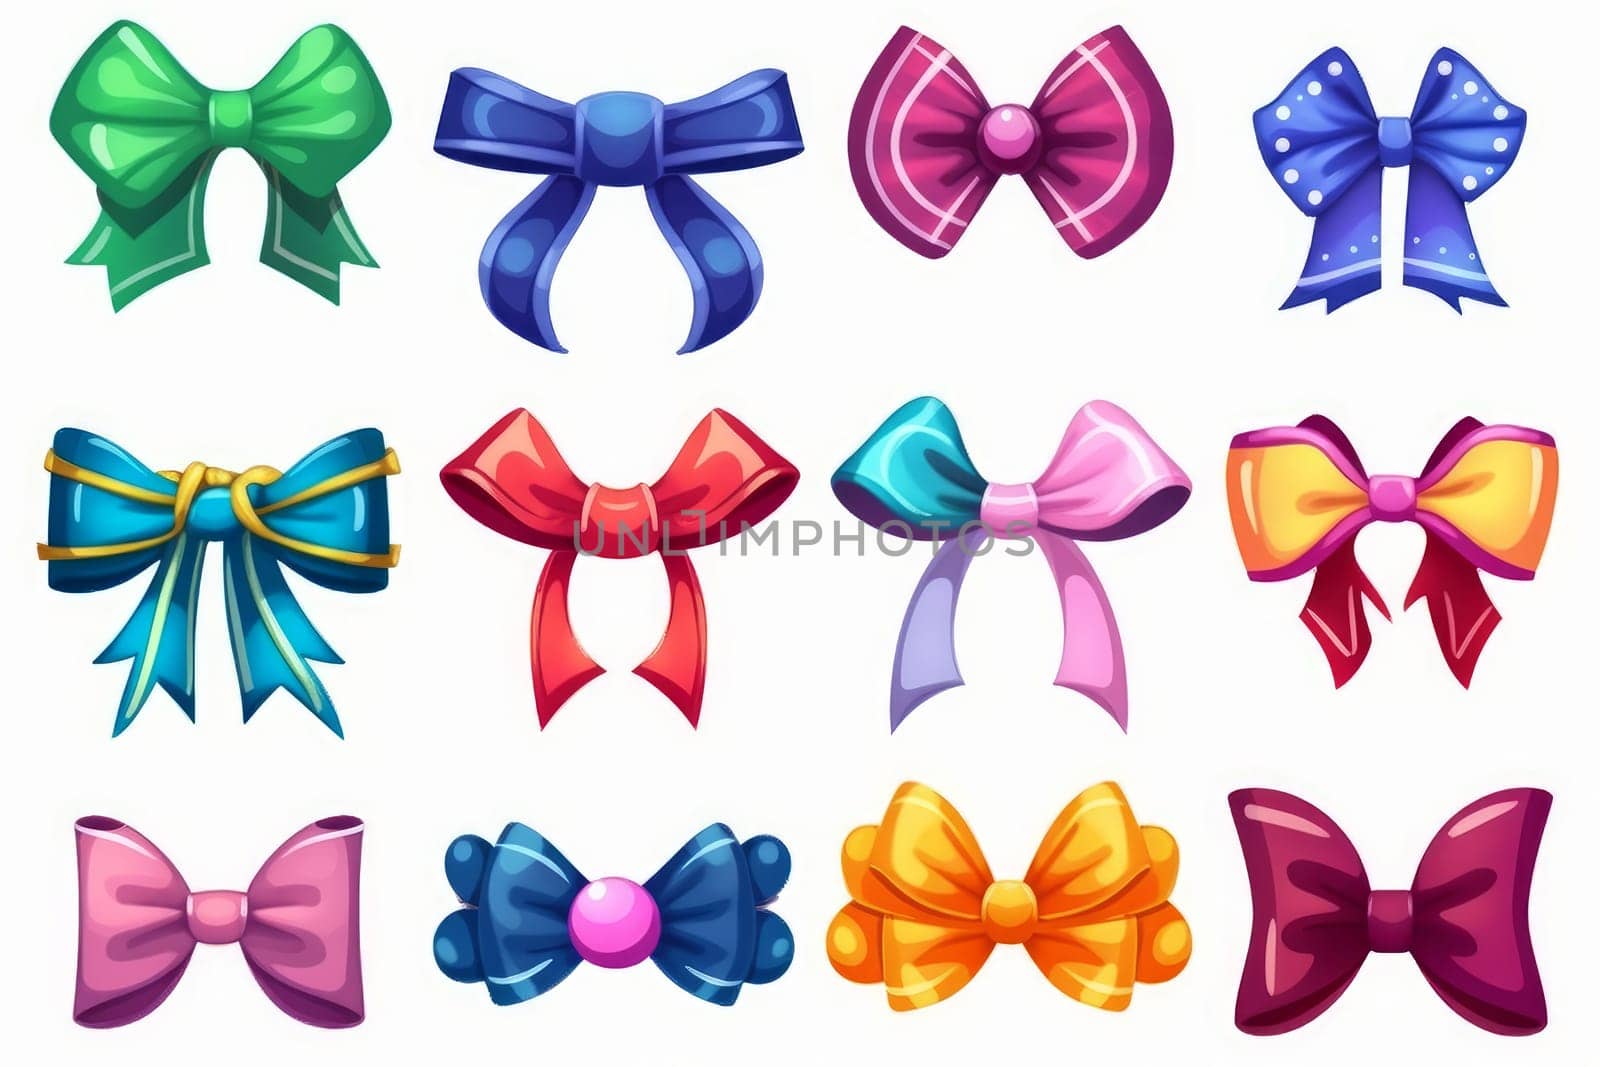 New bow game cartoon set by ylivdesign